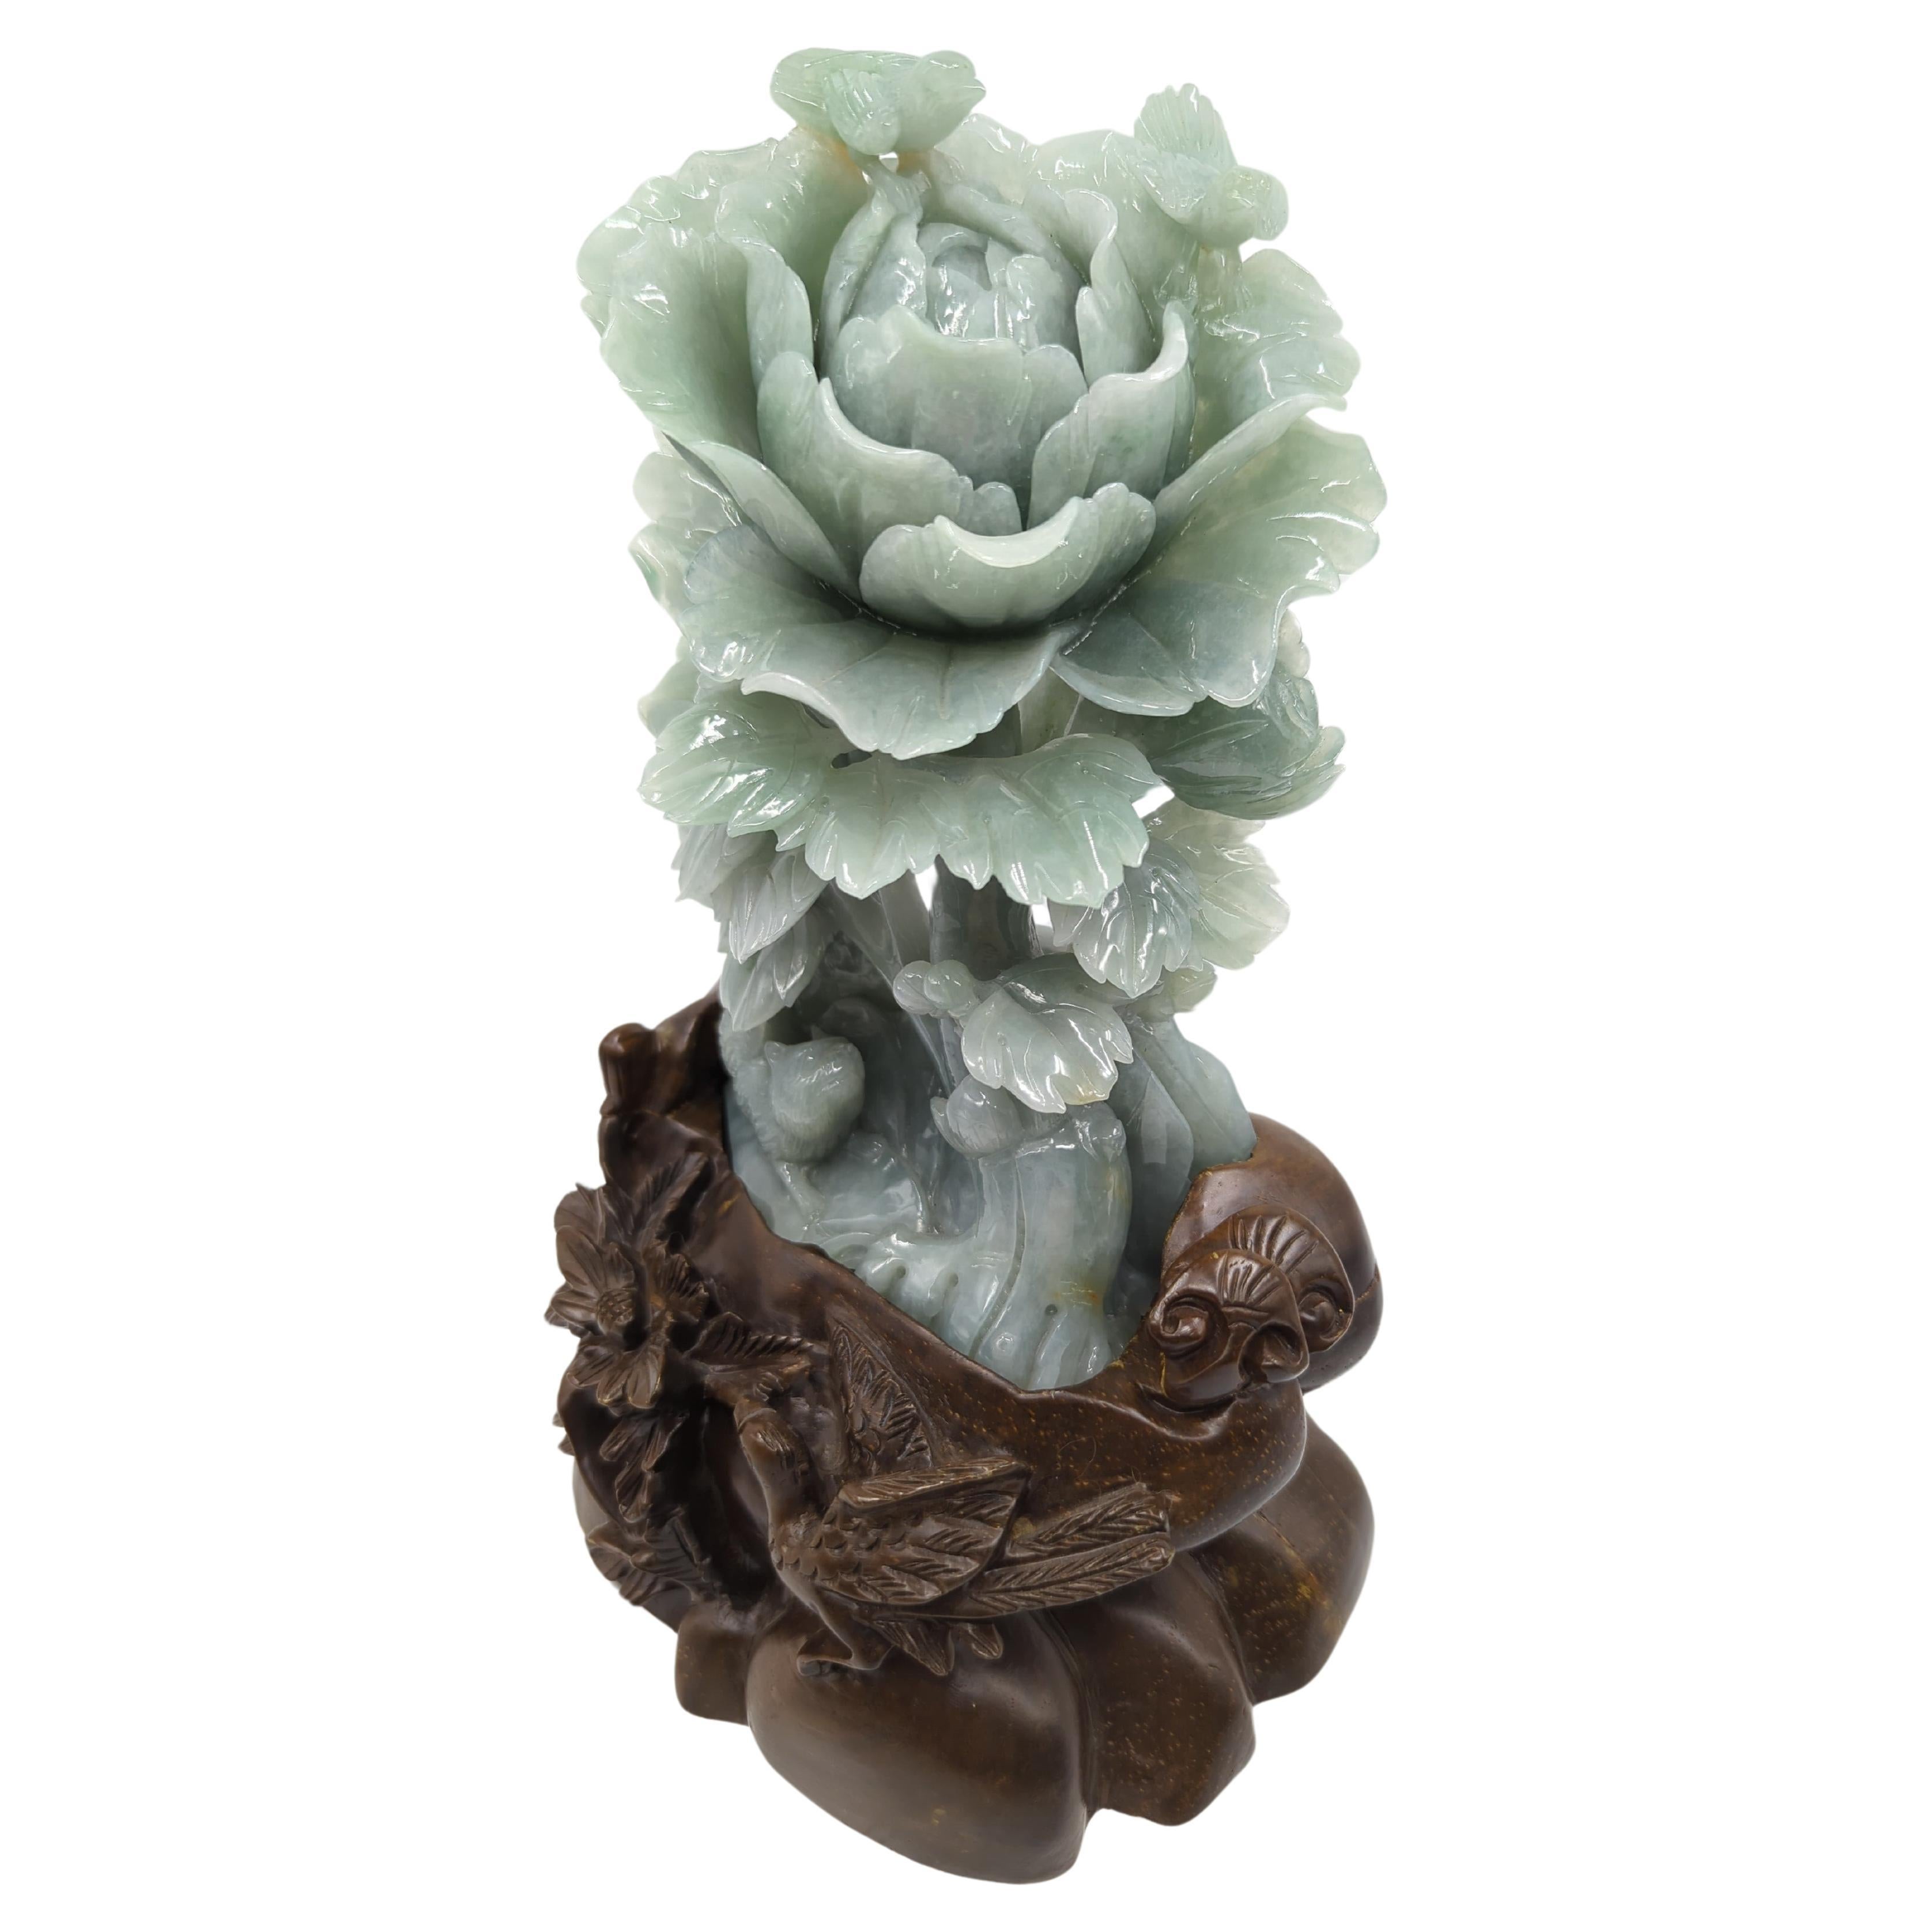 This modern Chinese sculpture, standing at an impressive 10 inches on its stand, is a masterful representation of contemporary jadeite craftsmanship, particularly from the renowned Suzhou tradition. Carved from natural, untreated jadeite, the